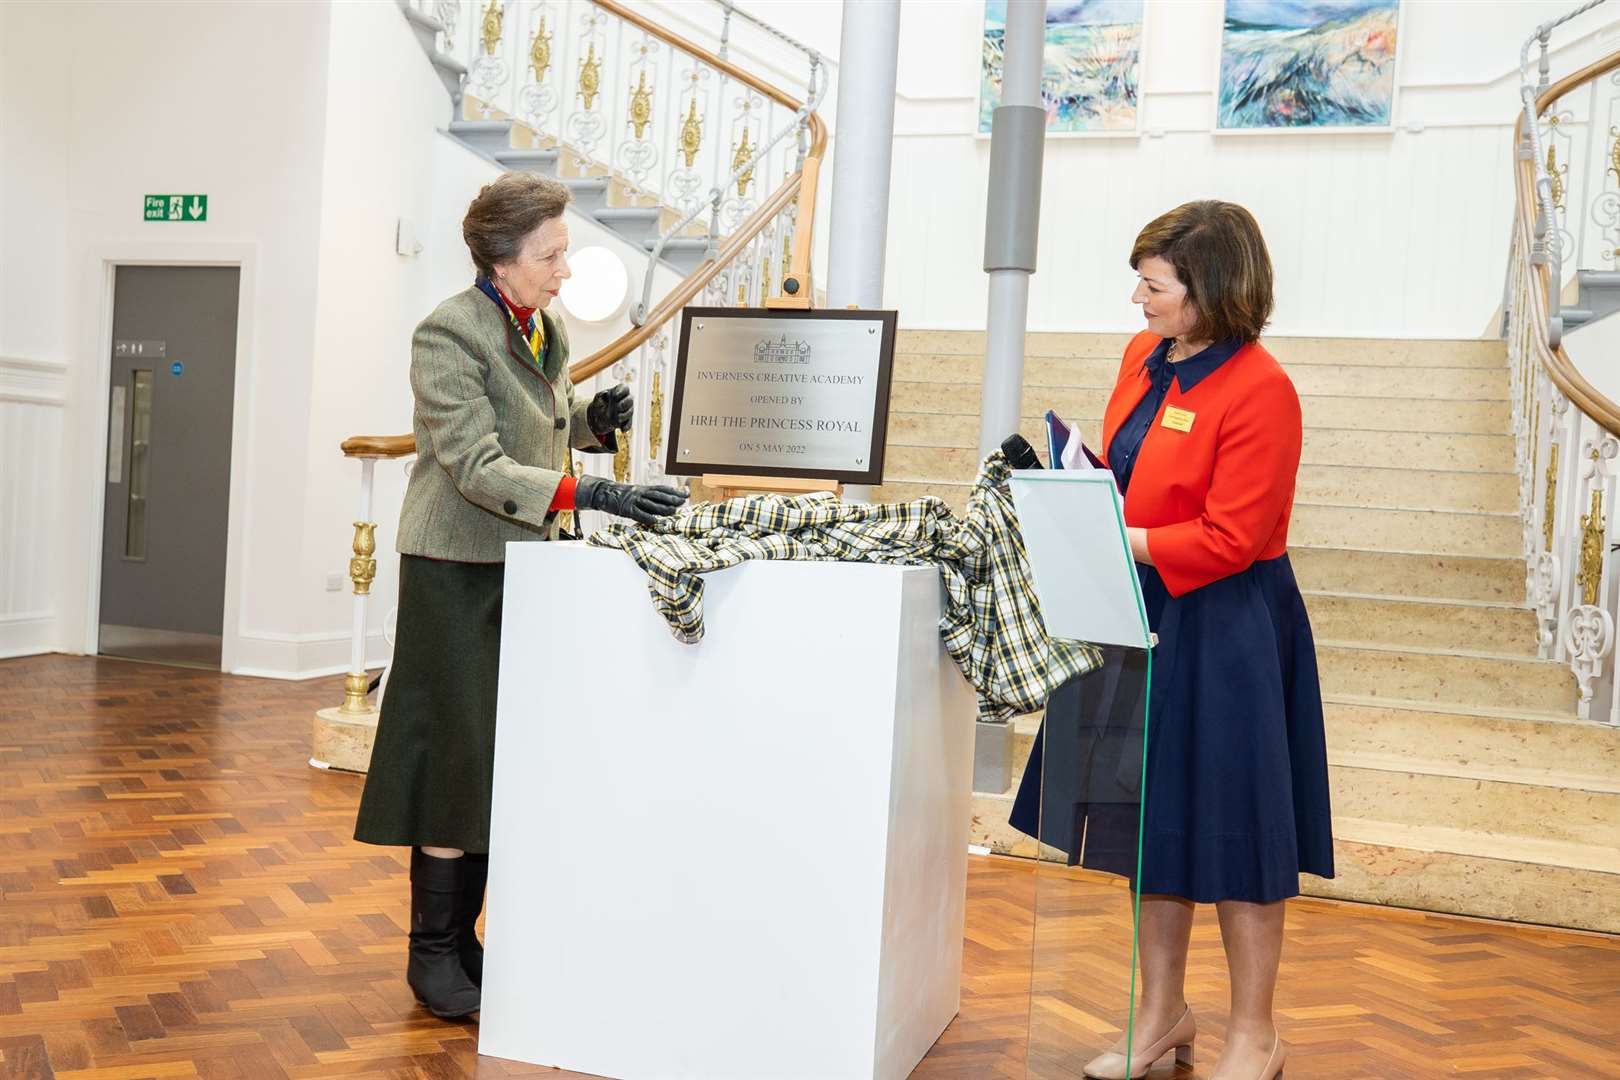 During the official visit, The Princess Royal met the key contributors to the development project, as well as Wasps staff, artists who have occupied the first phase of the Academy since its opening in 2018, and some of the more recent creative industries tenants who moved into the final phase. Photo: Paul Campbell